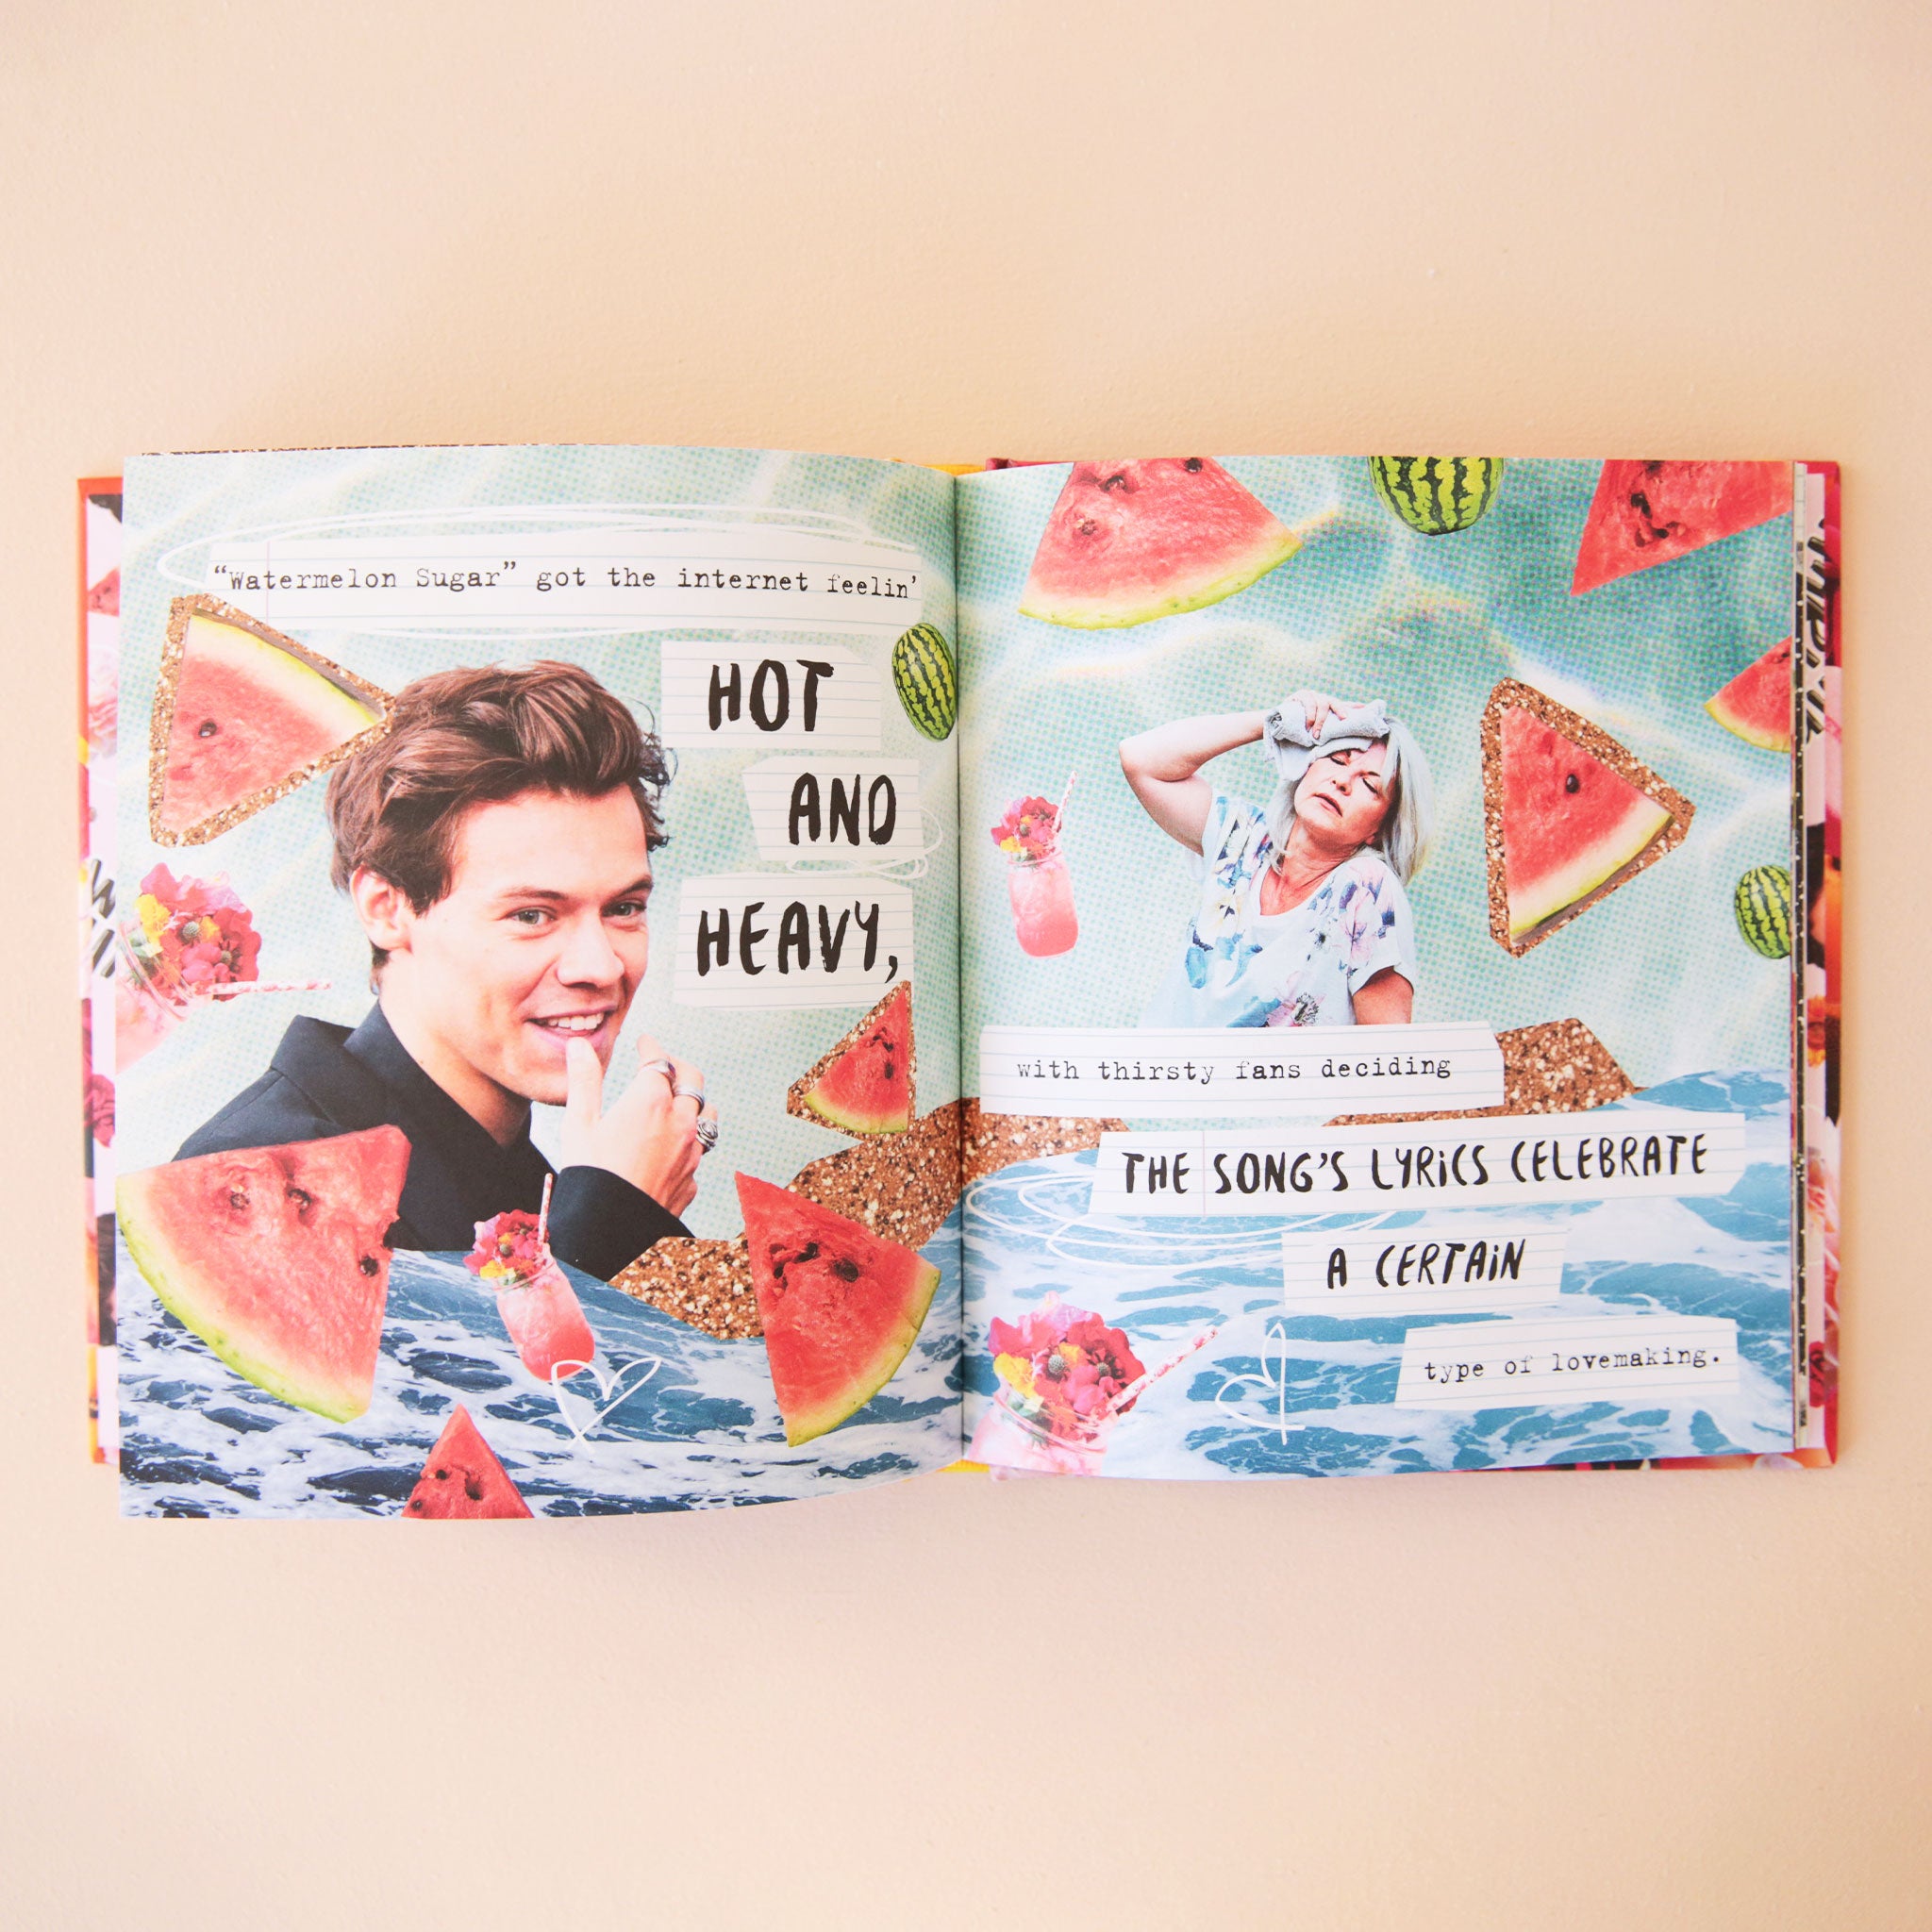 A sneak peak inside the book that features collages of photographs of harry along with fun watermelon graphics and song lyrics. 